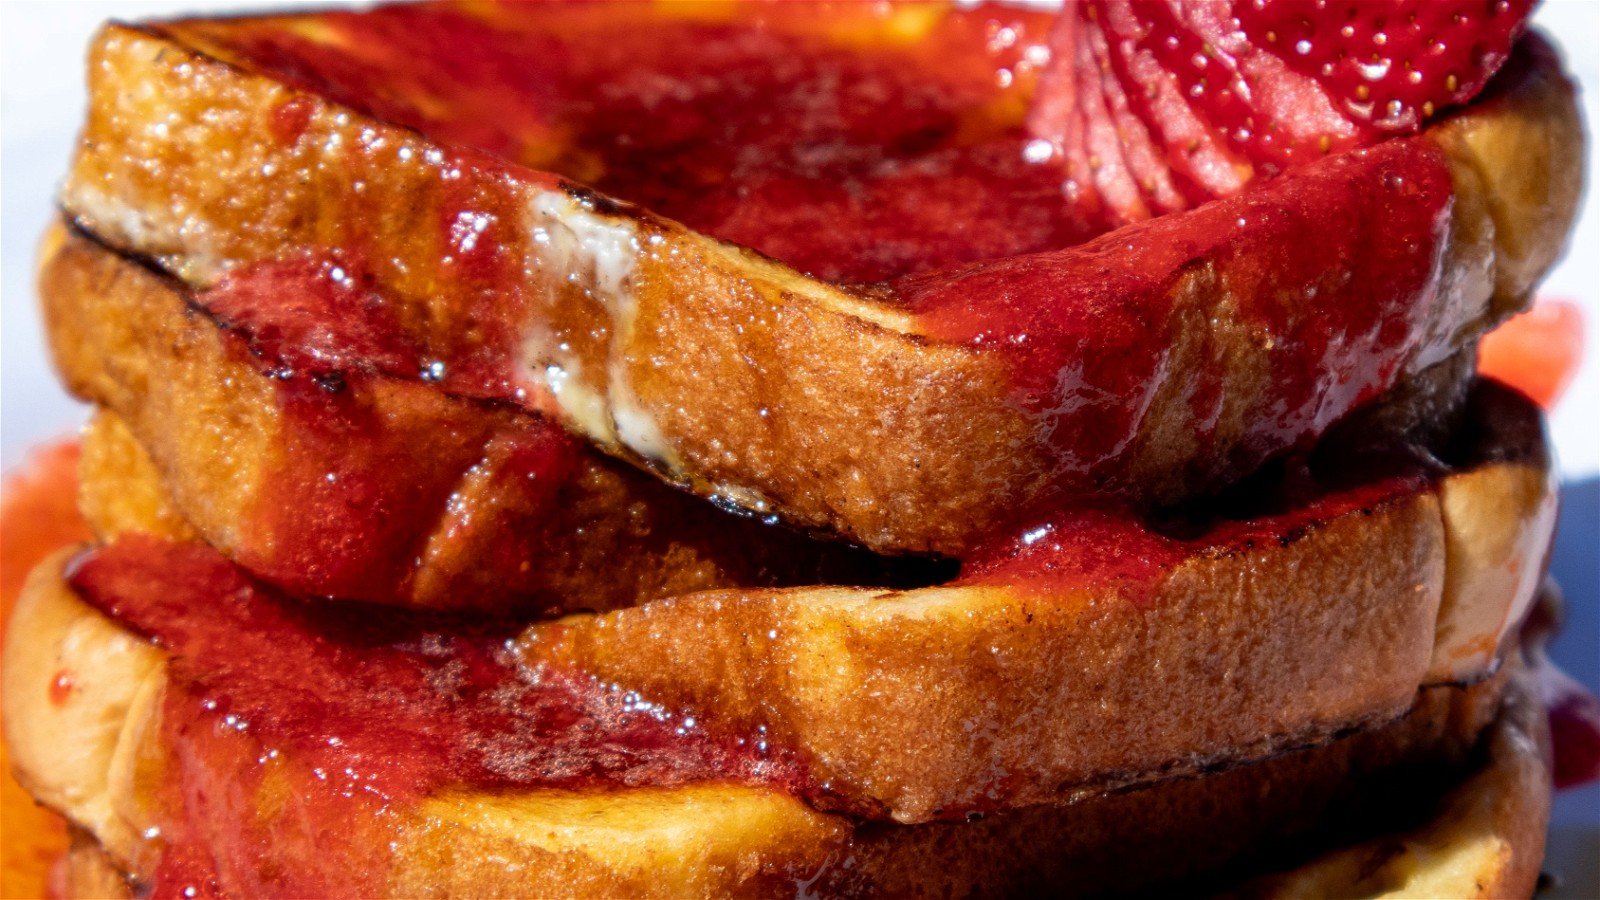 Image of French Toast with Homemade Strawberry Sauce